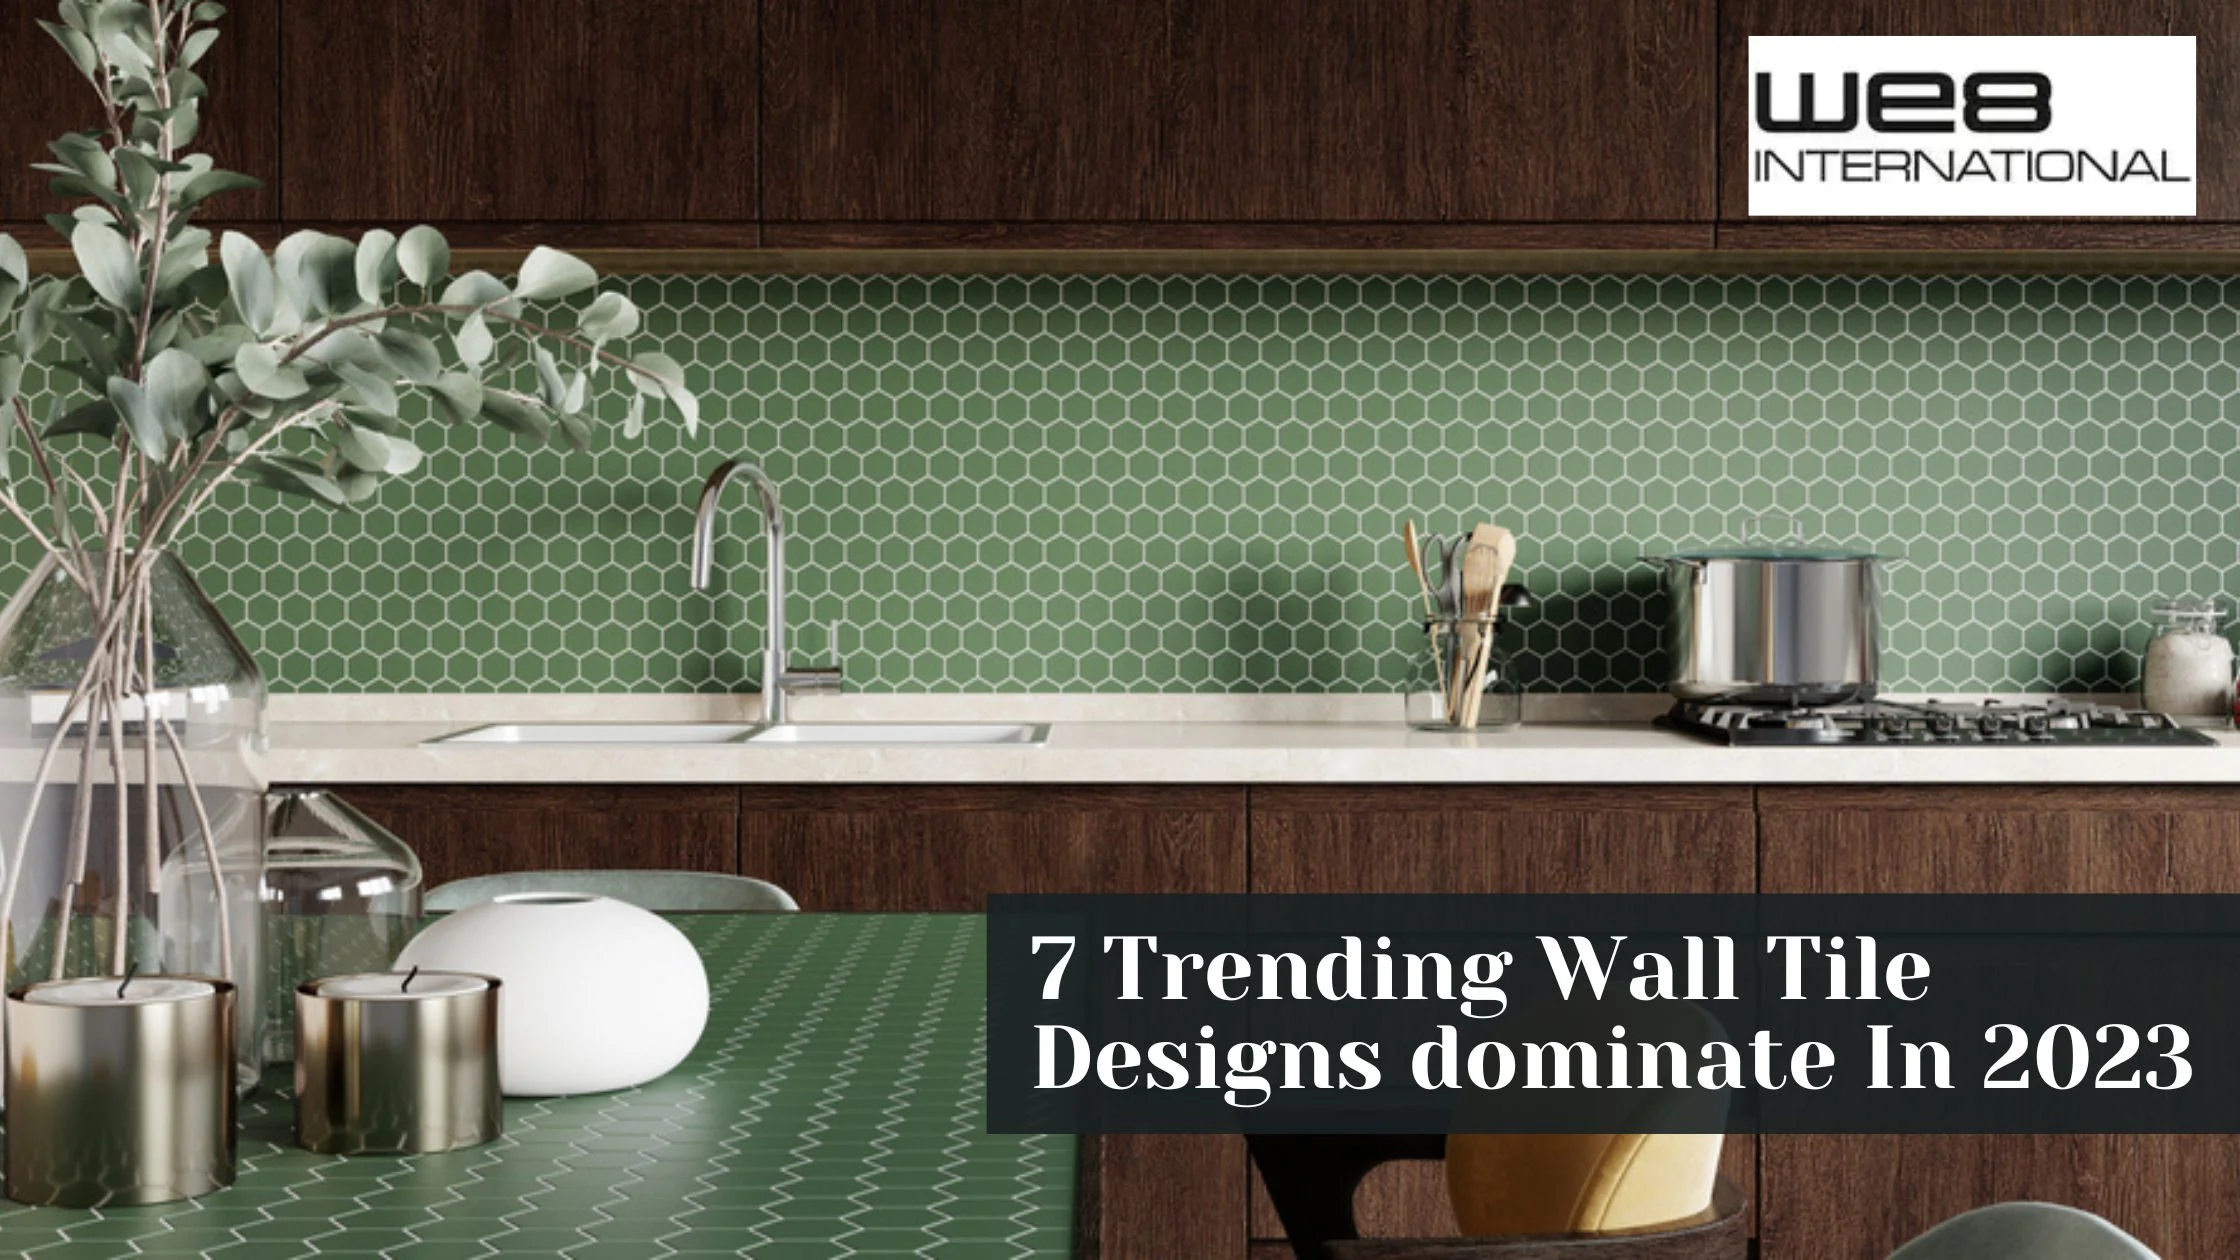 7 Trending Wall Tile Designs to Dominate in 2023